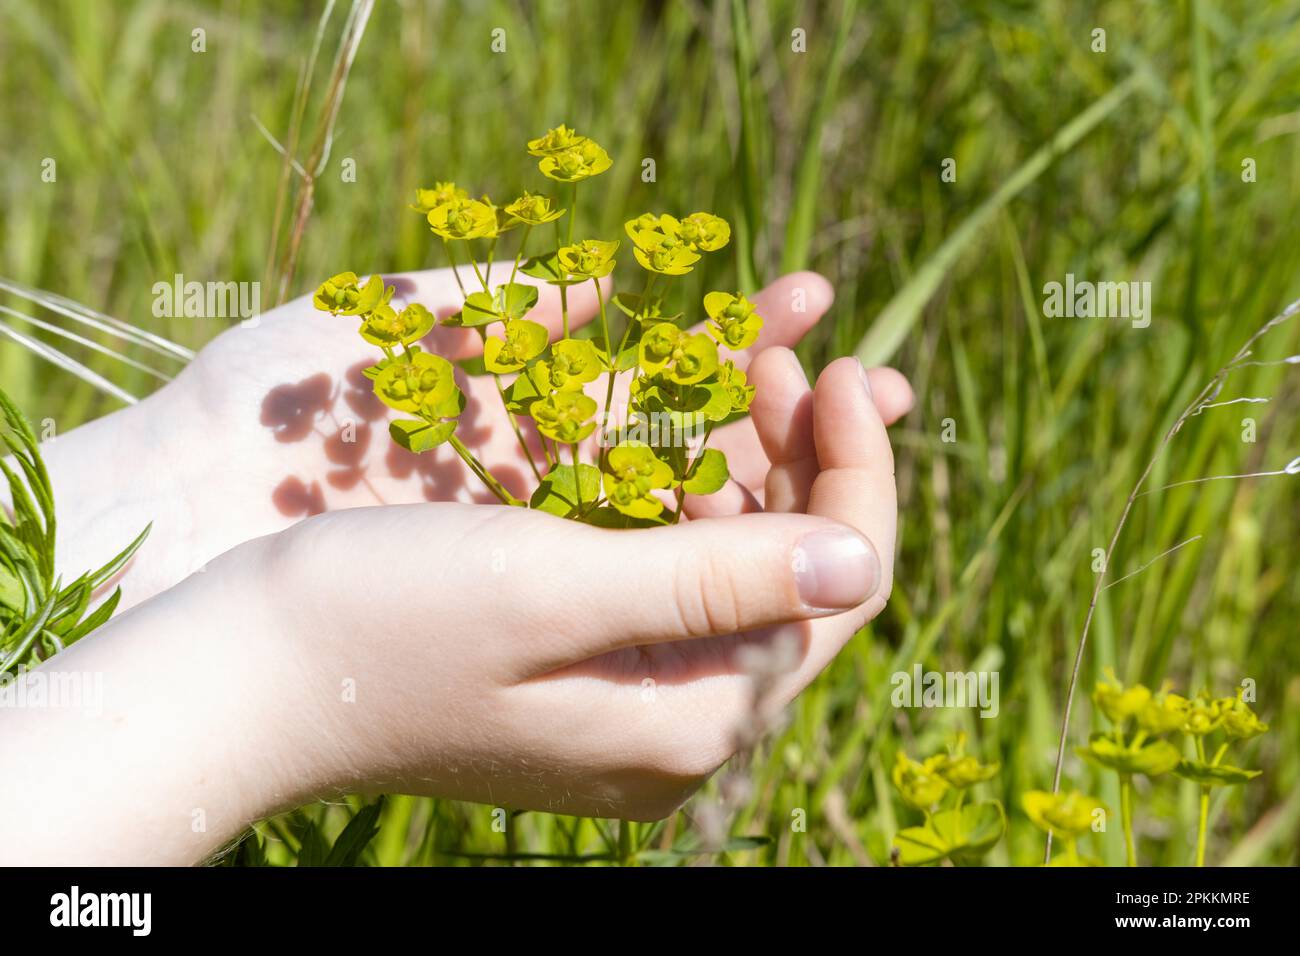 Women's palms holding a green flower, inflorescence in the meadow, showing the concept of rural life, wellness, springtime Stock Photo